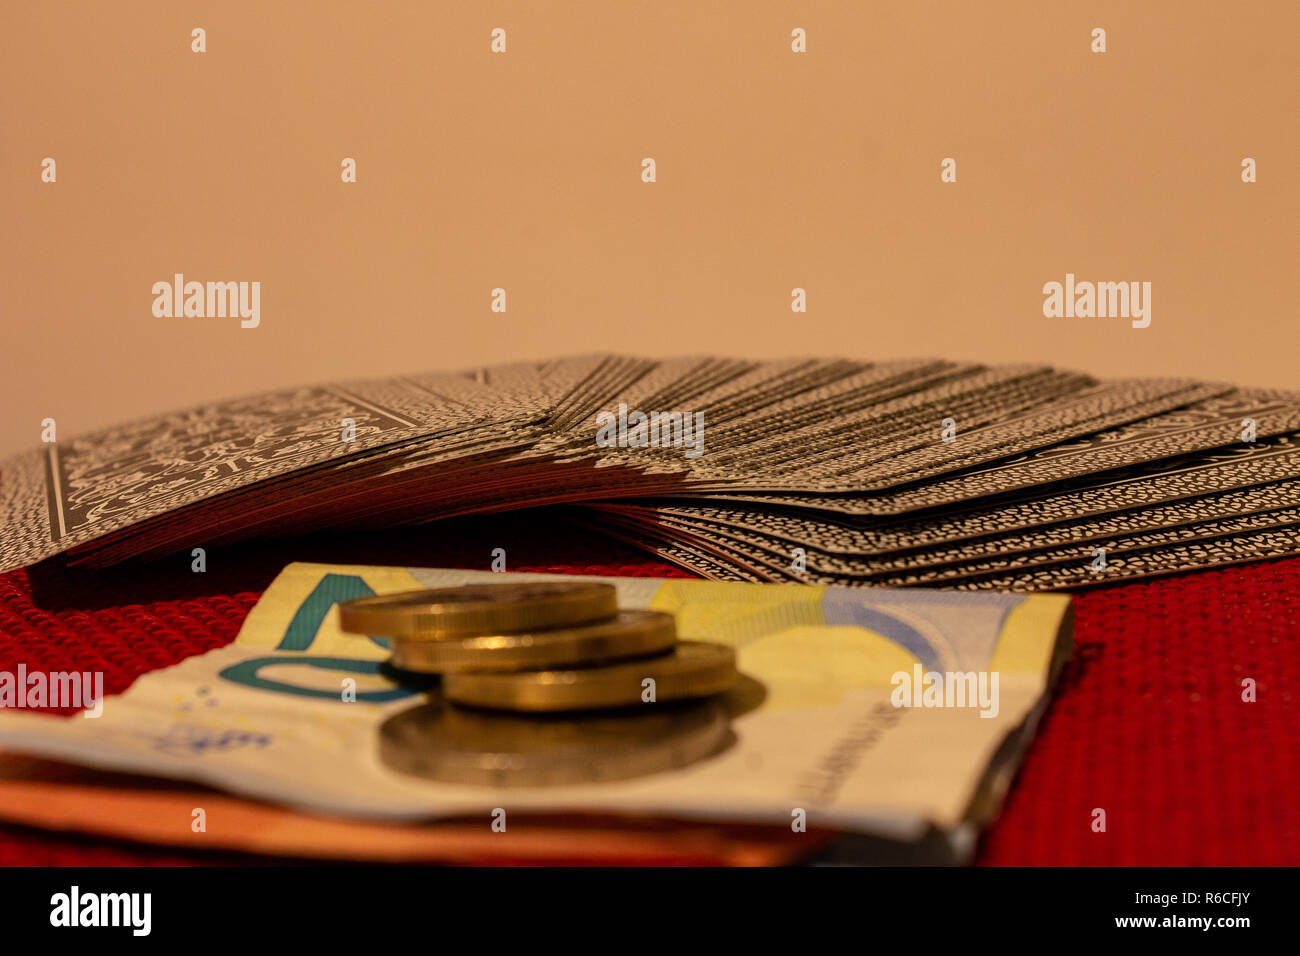 Gambling, with cards, money, or simply card game when the family is reunited for the holidays. Stock Photo